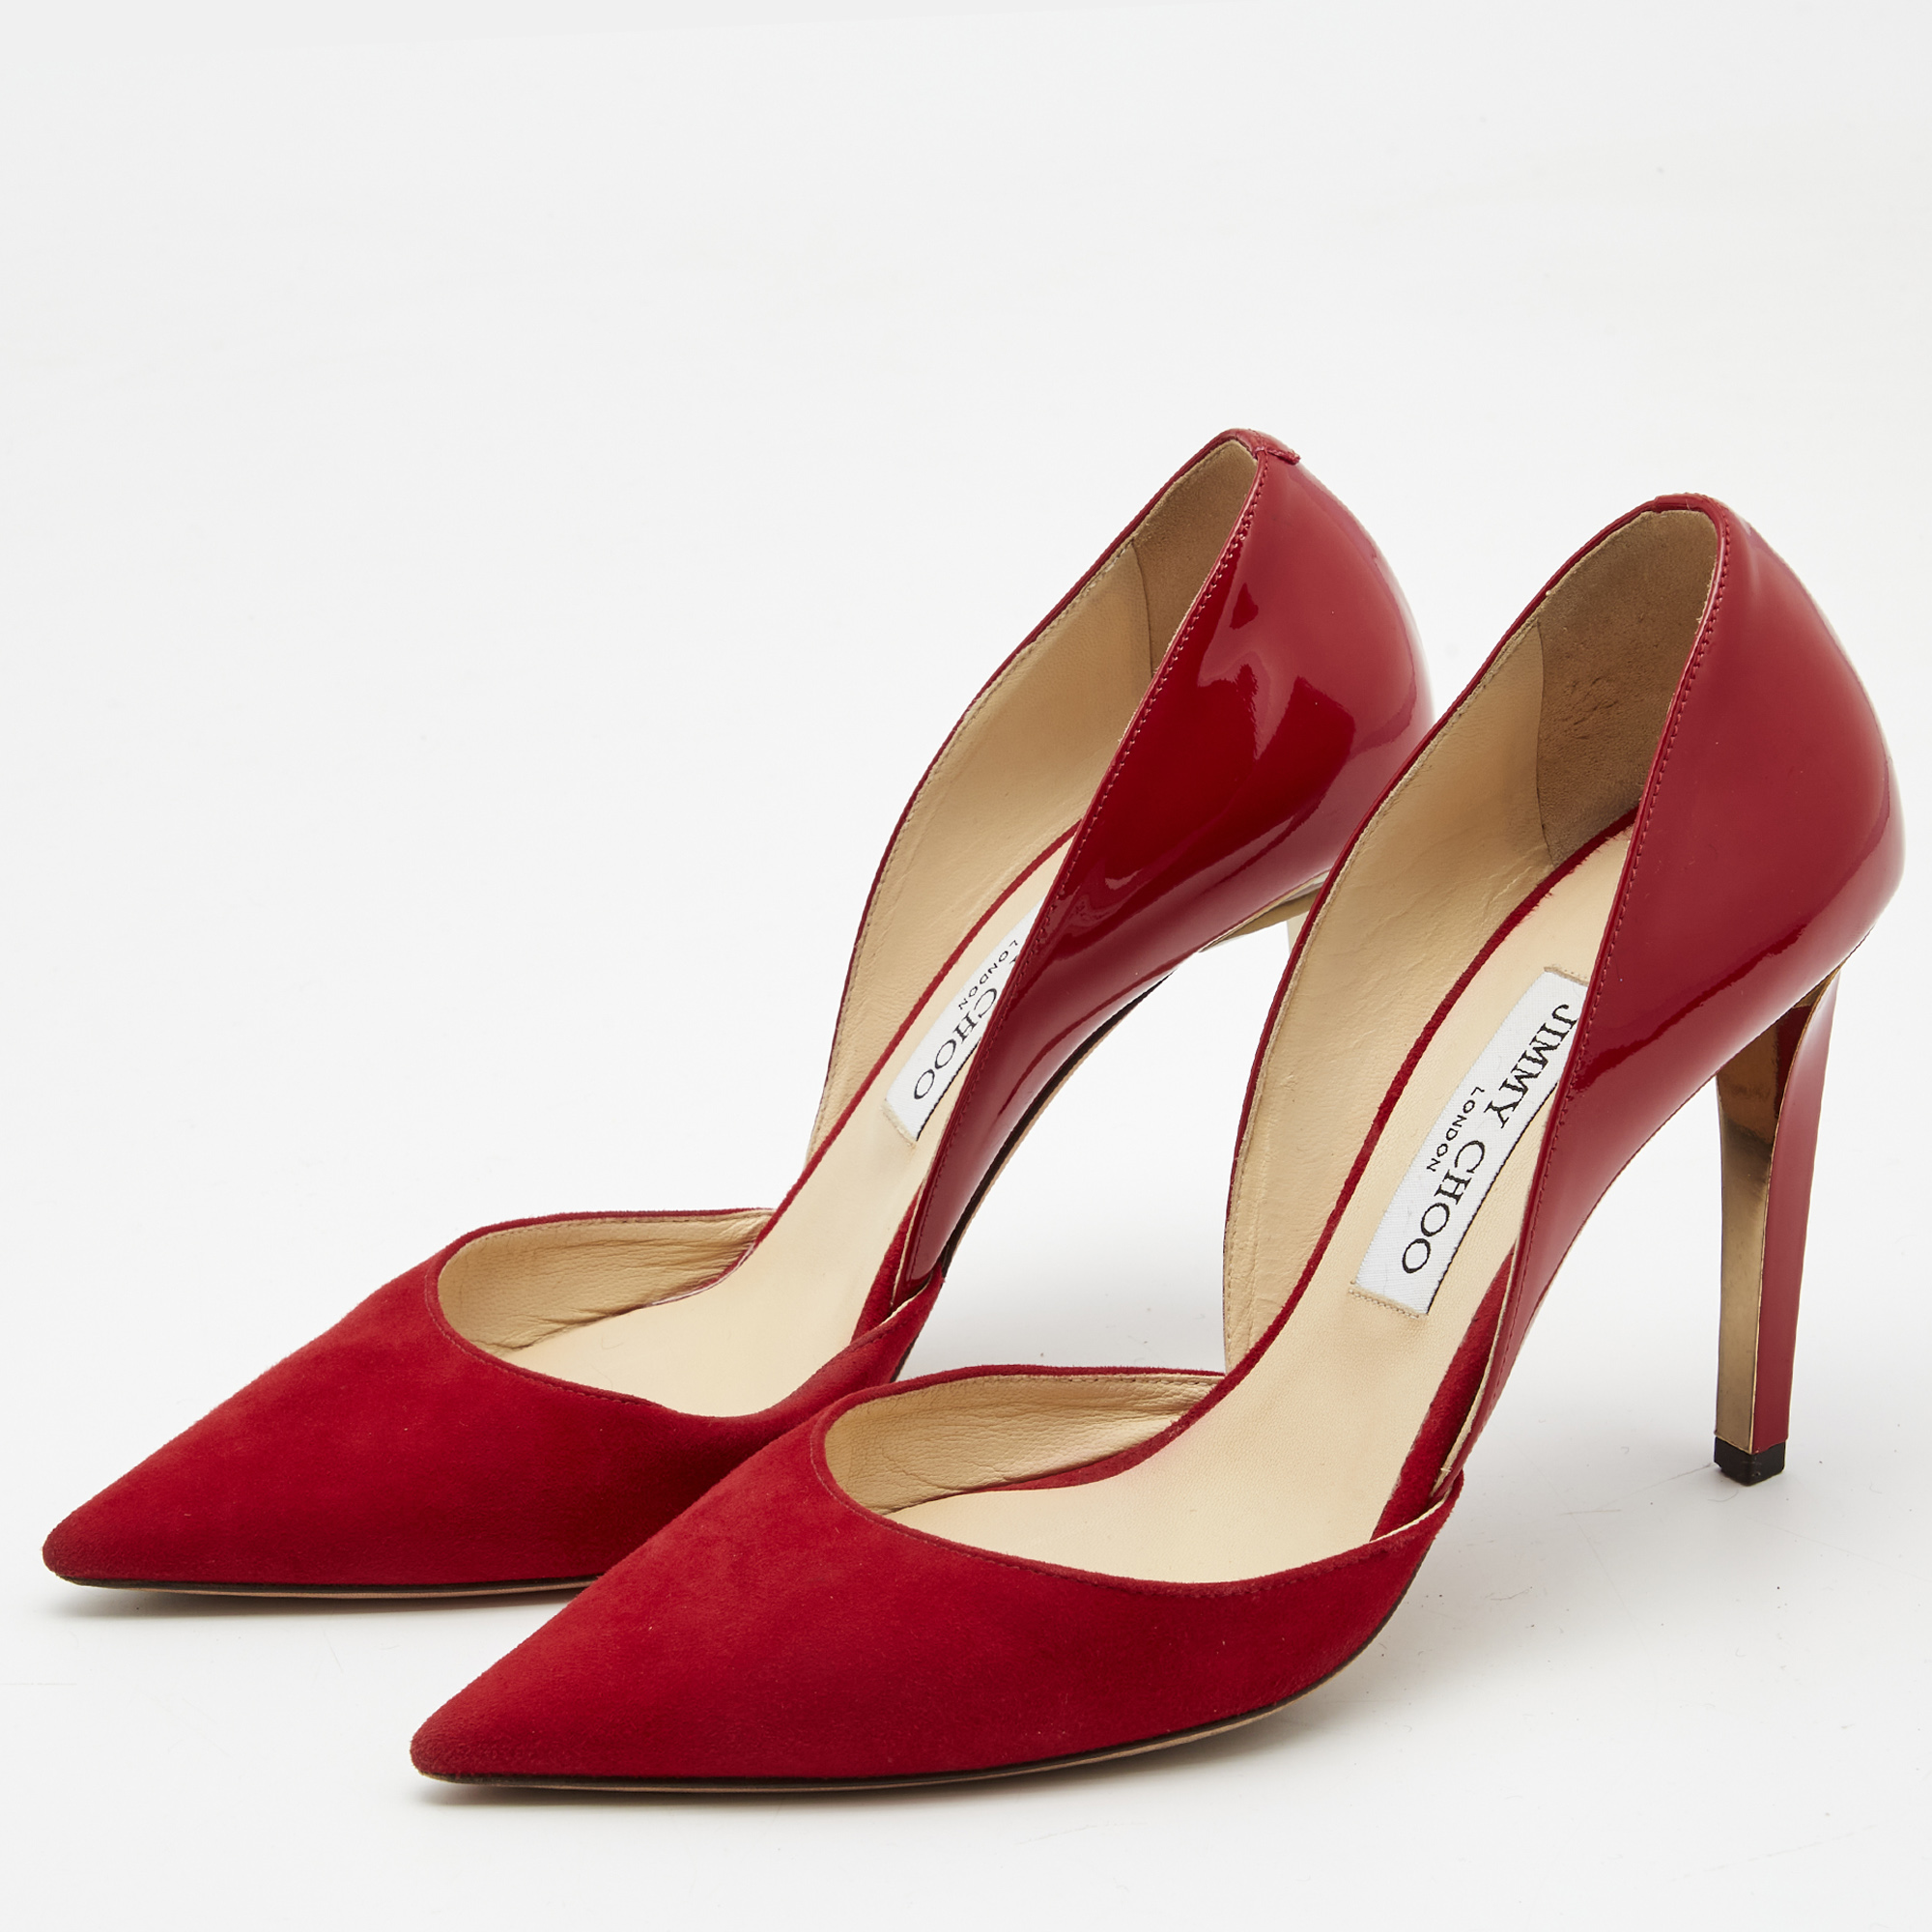 

Jimmy Choo Red Suede and Patent Leather Darylin Pumps Size